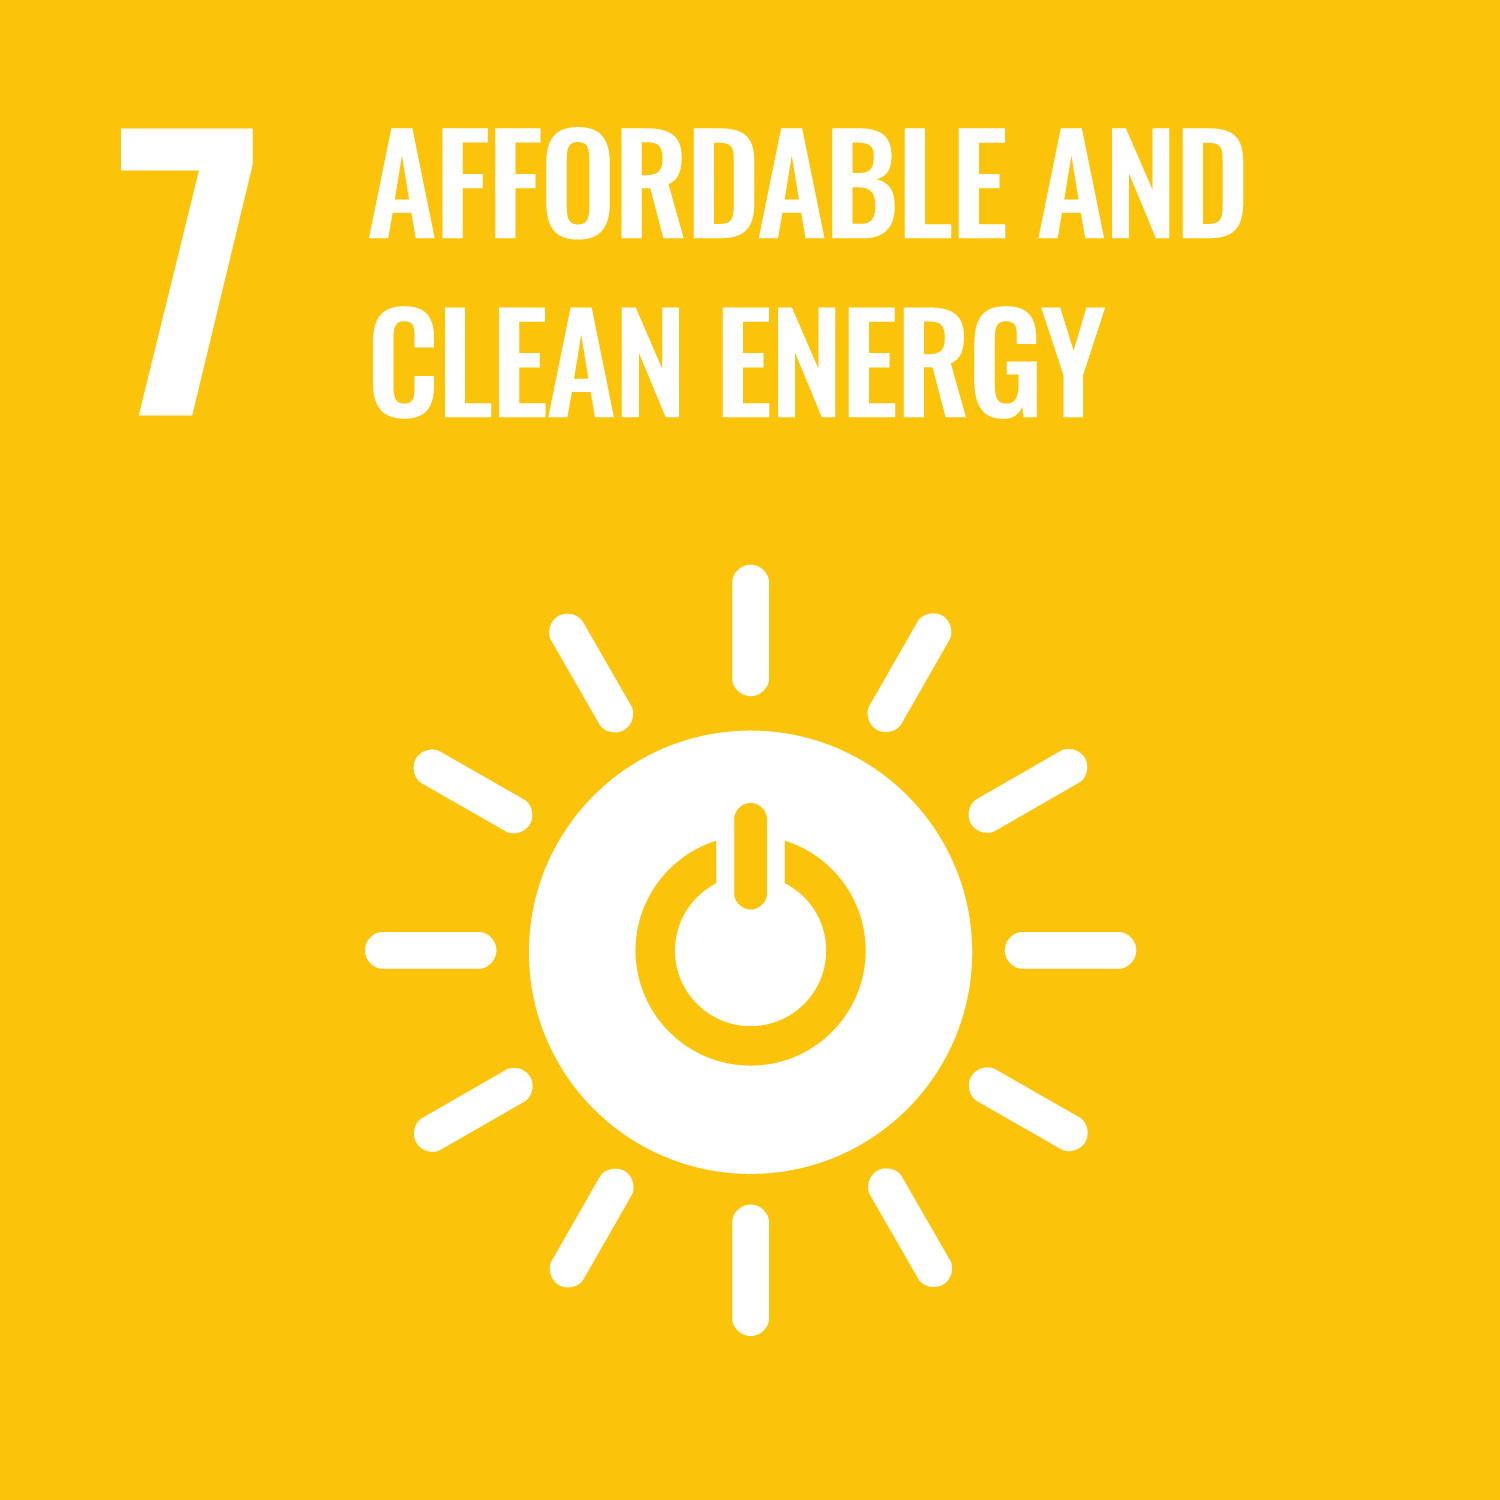 7. Affordable & Clean Energy